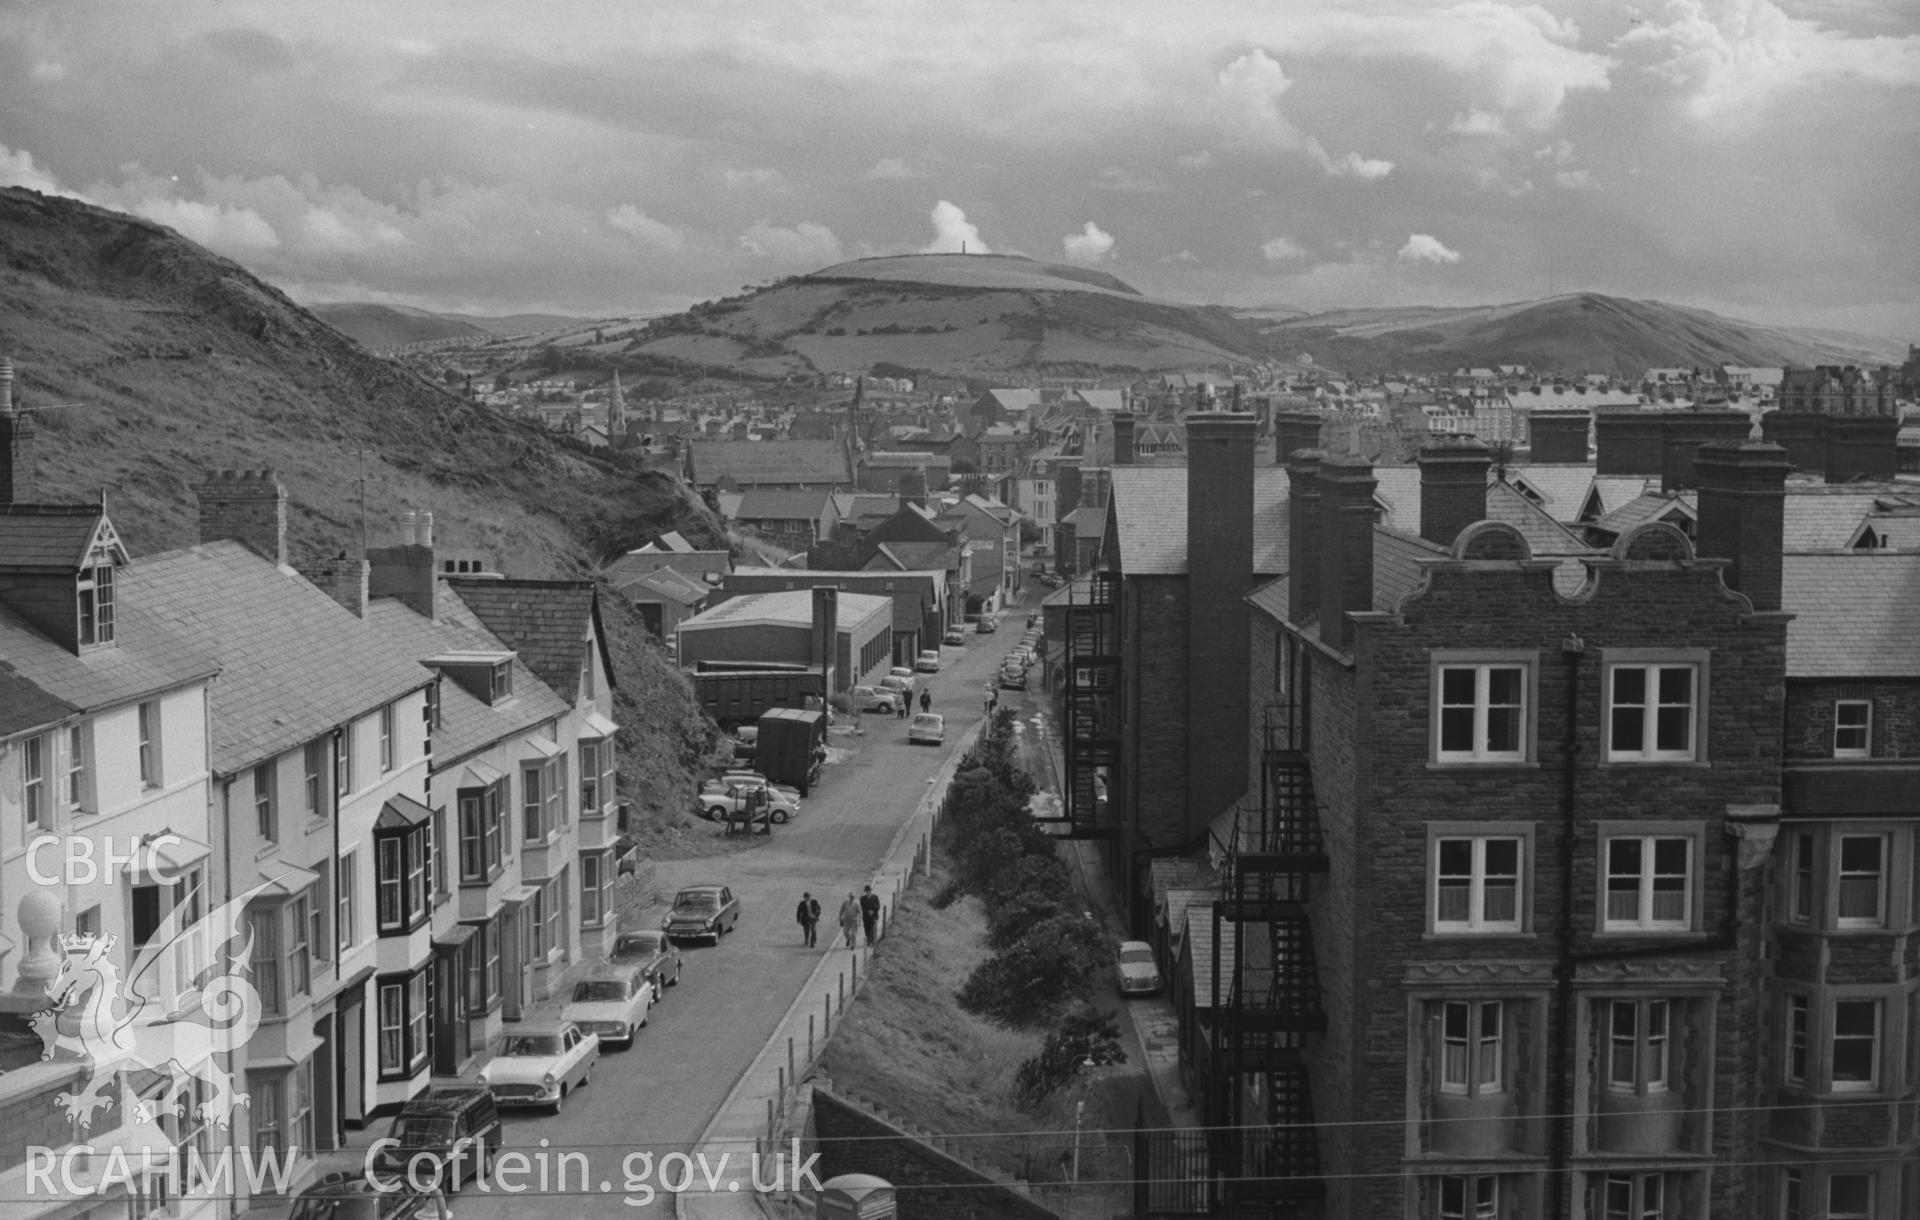 Digital copy of a black and white negative showing views over Aberystwyth from the lower slopes of Constitution Hill with Alexandra Hall in the foreground. Photographed by Arthur O. Chater on 15th August 1967 looking south from Grid Reference SN 583 826.